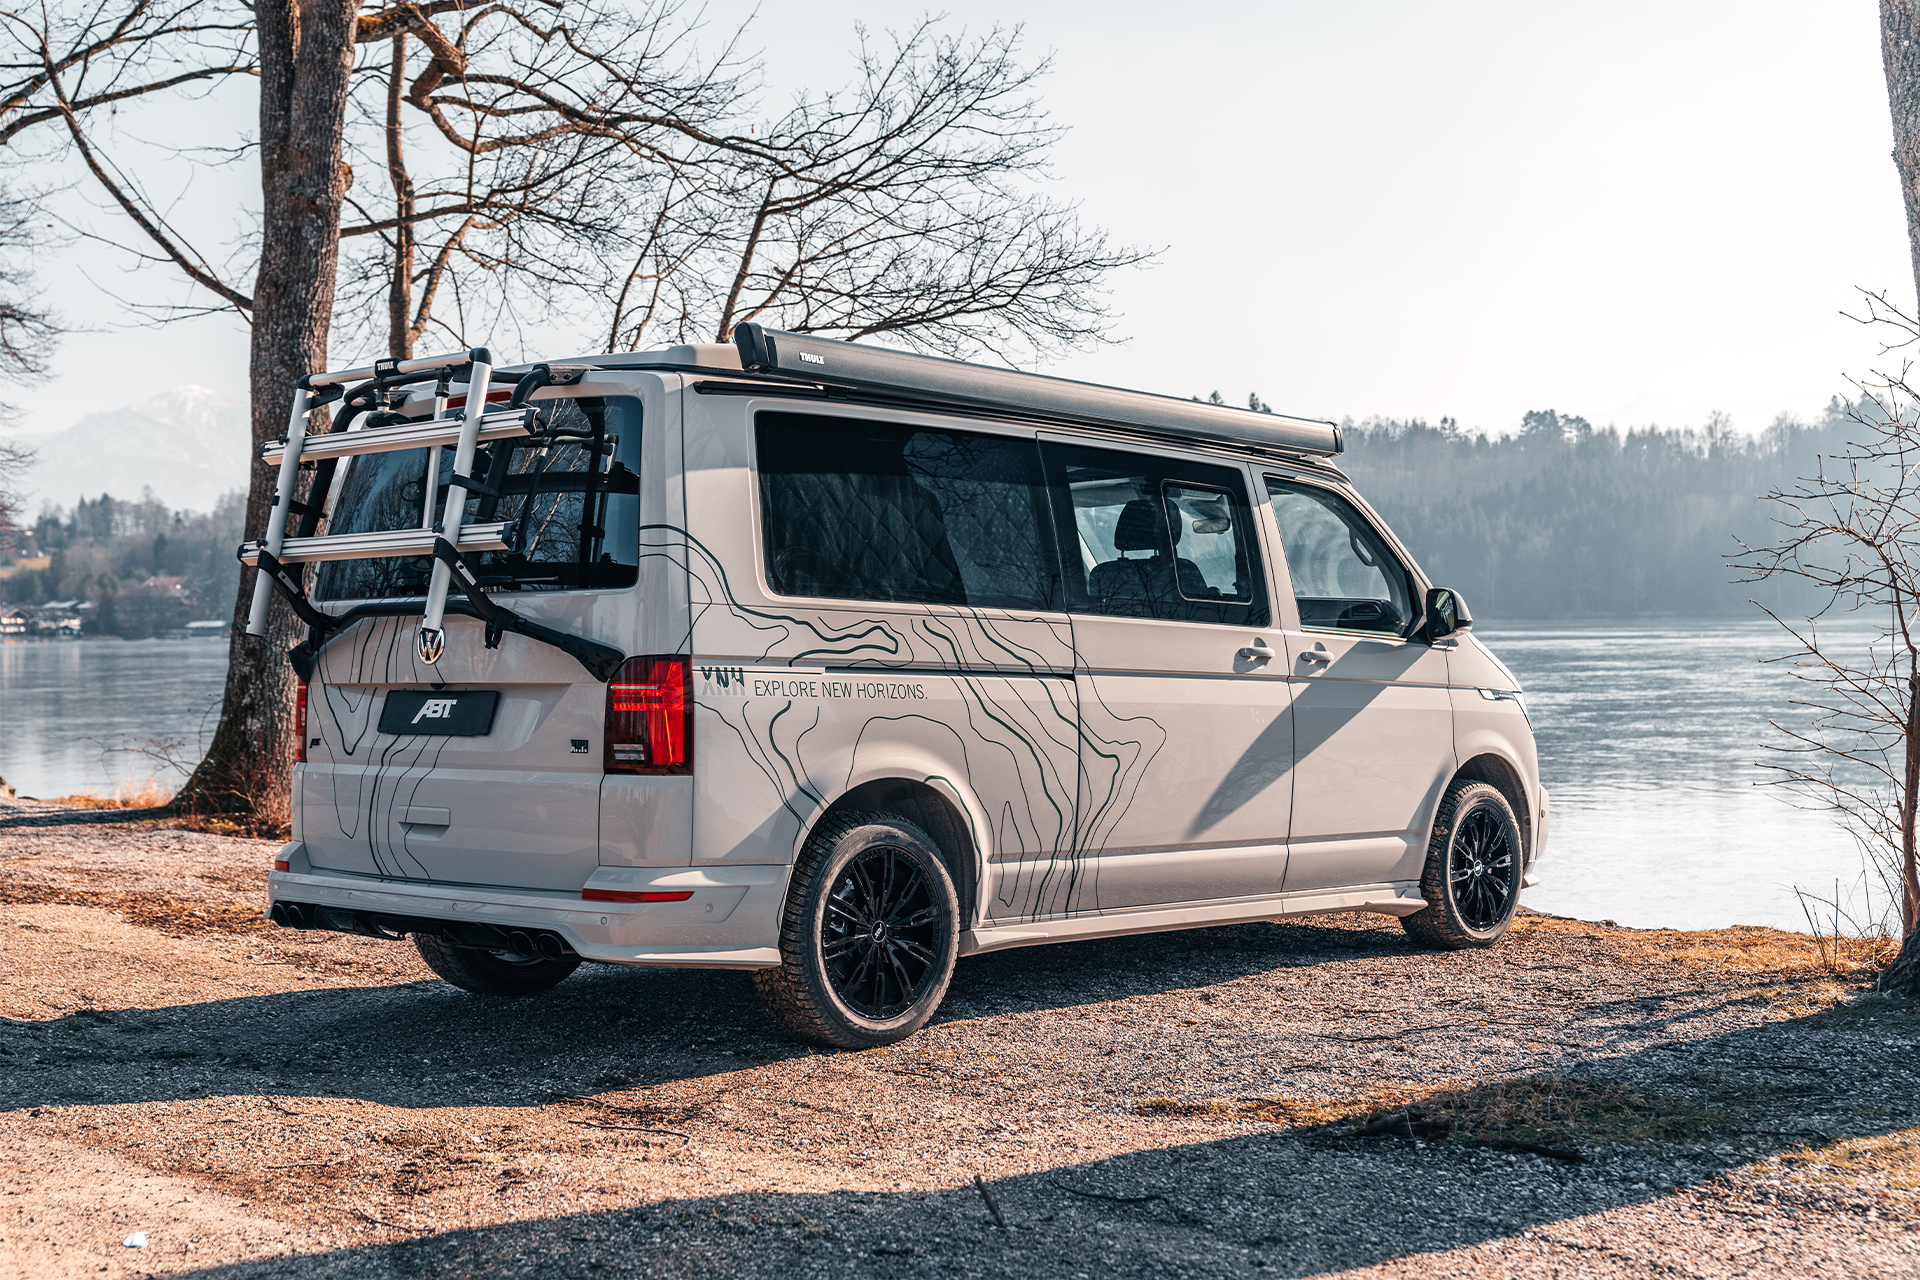 The ABT among the camper vans - Premiere of the ABT XNH based on the VW T6.1  at the f.re.e trade fair - Audi Tuning, VW Tuning, Chiptuning von ABT  Sportsline.